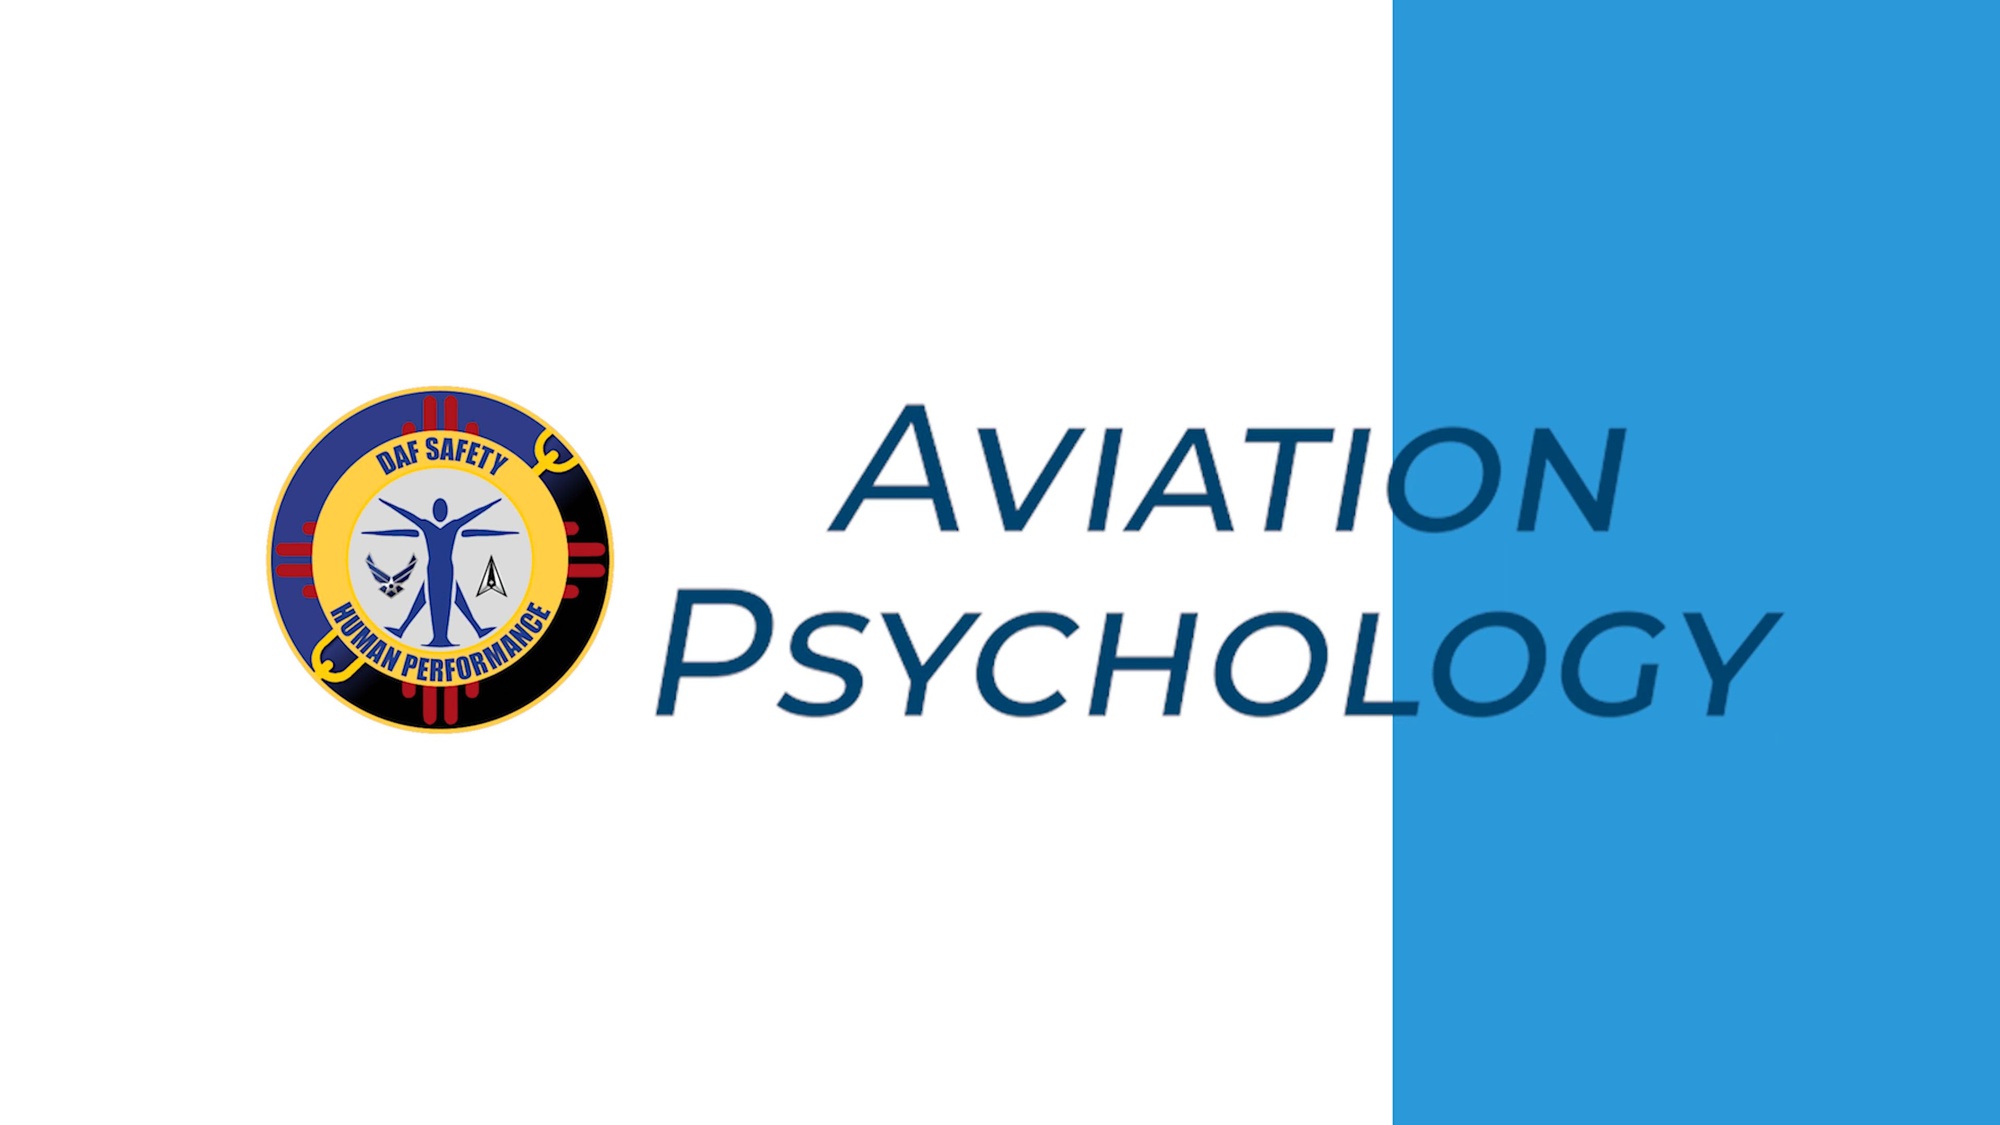 Aviation Psychologists discuss details of the field of Aviation Psychology.